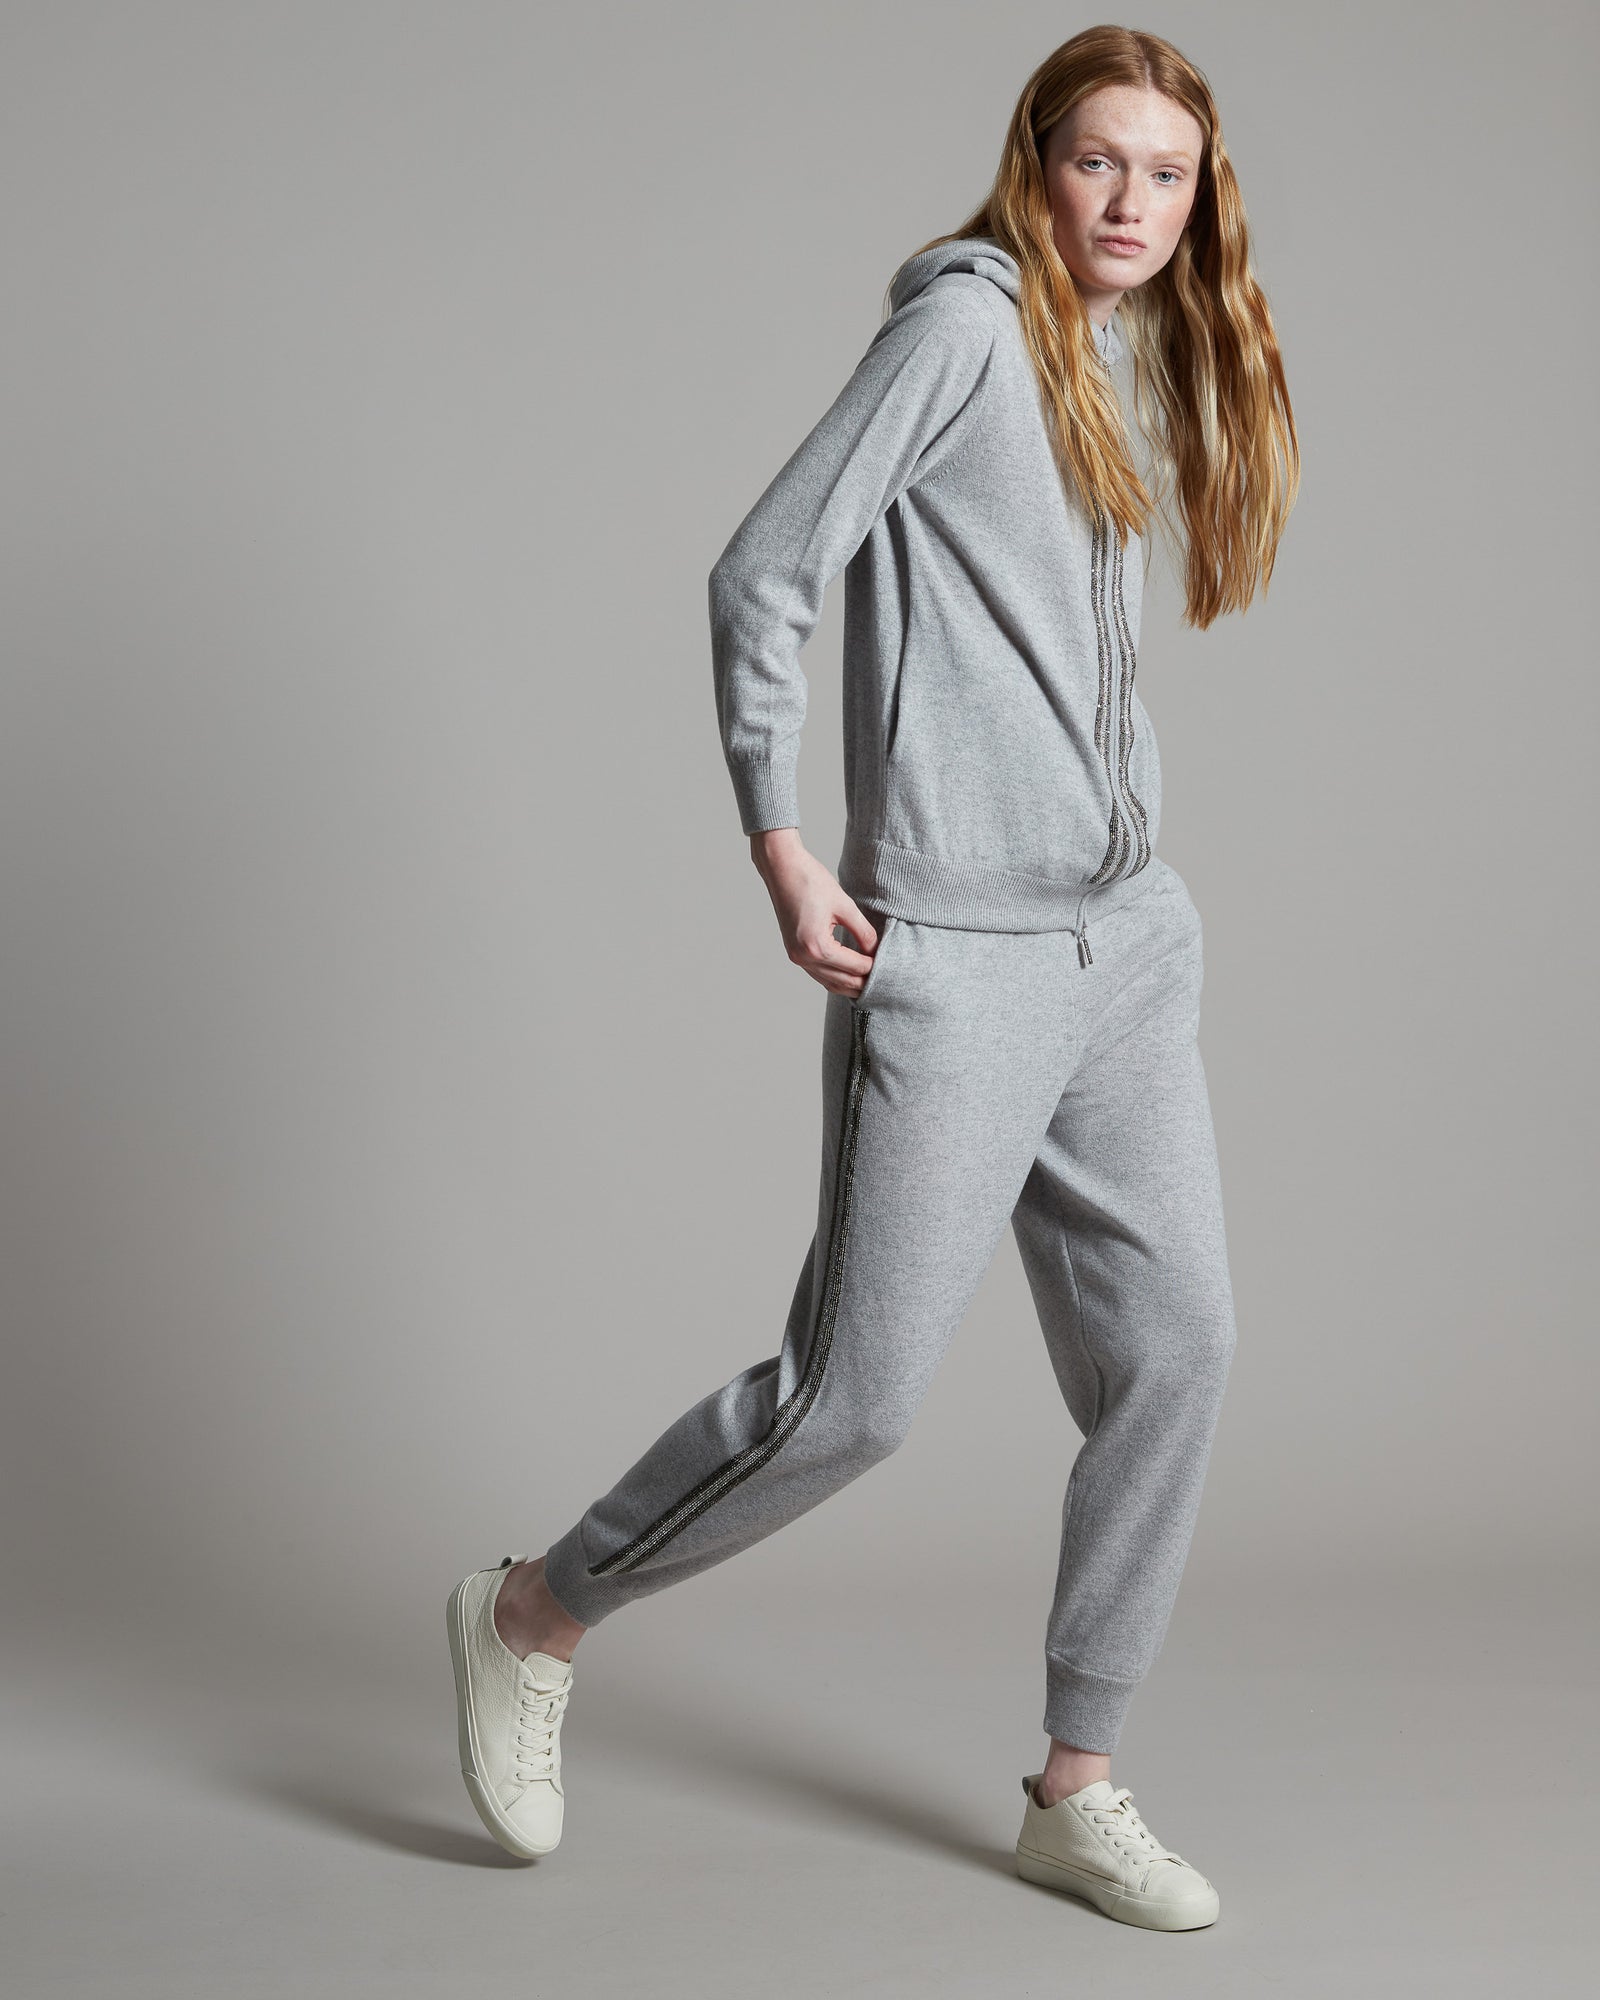 Grey Kid Cashmere hoodie with sparkling embroidered bands